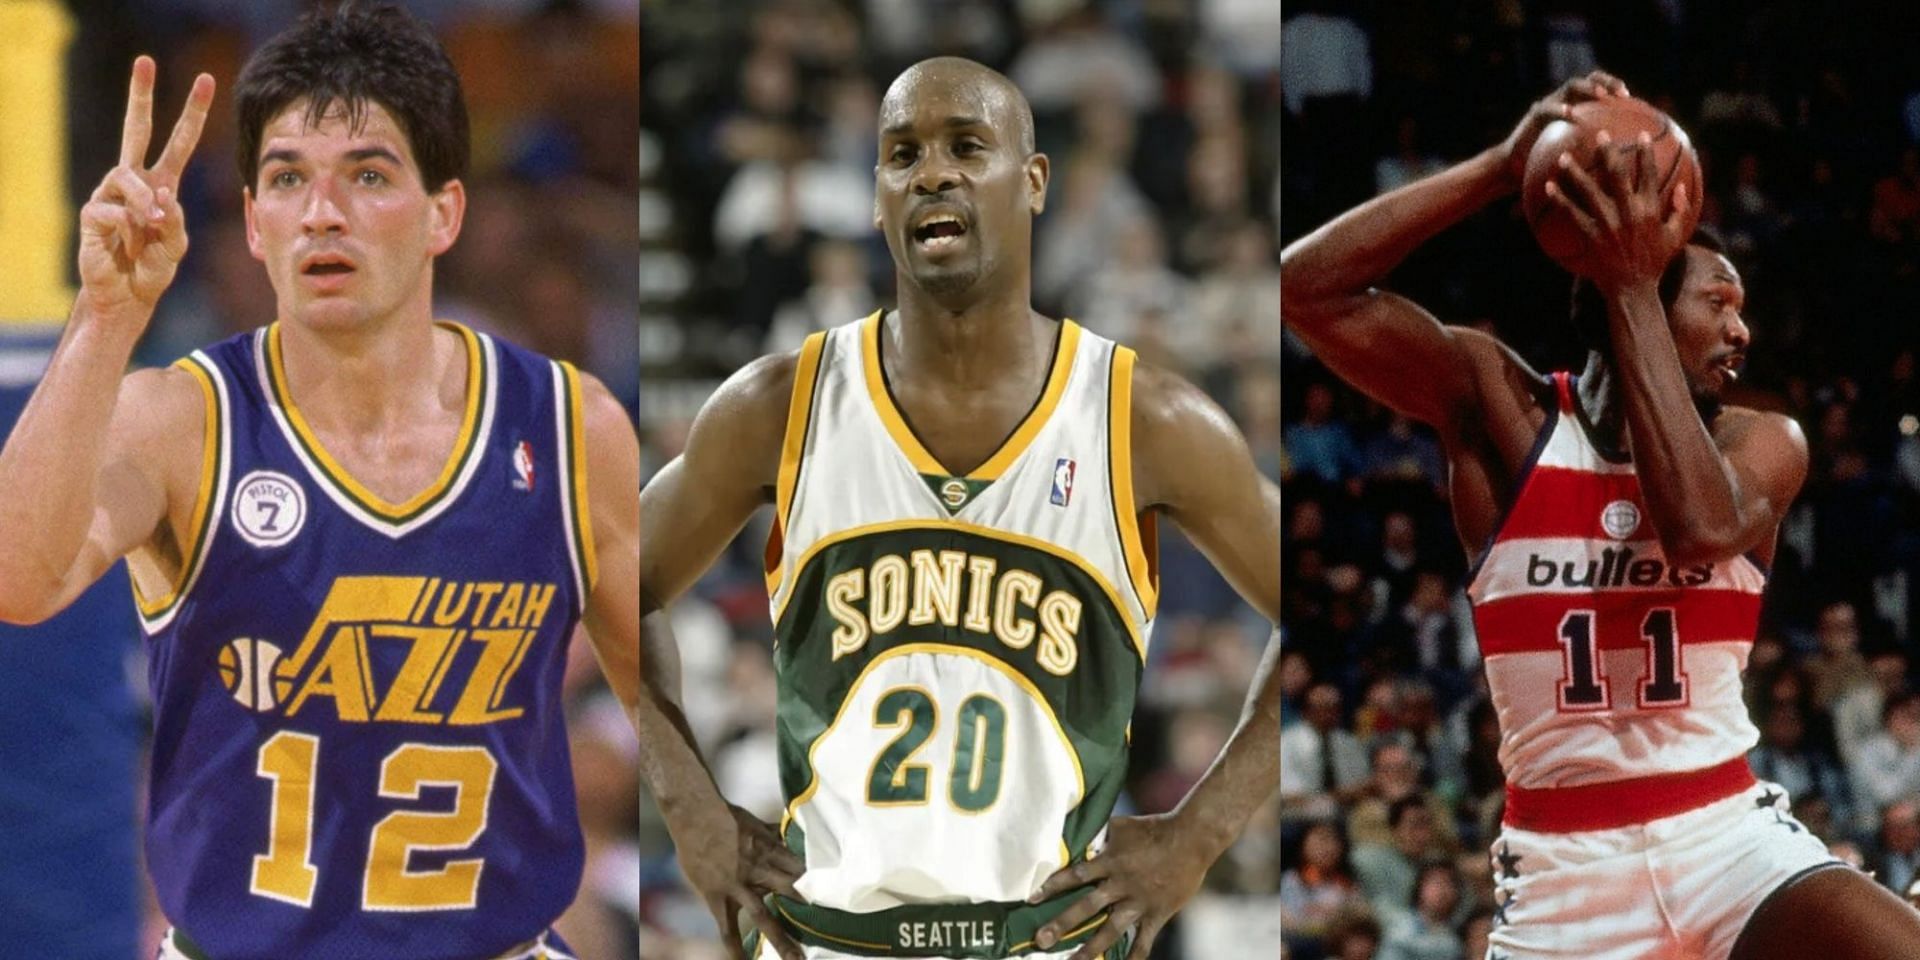 Top 12 Greatest and Famous Basketball Players of All Time